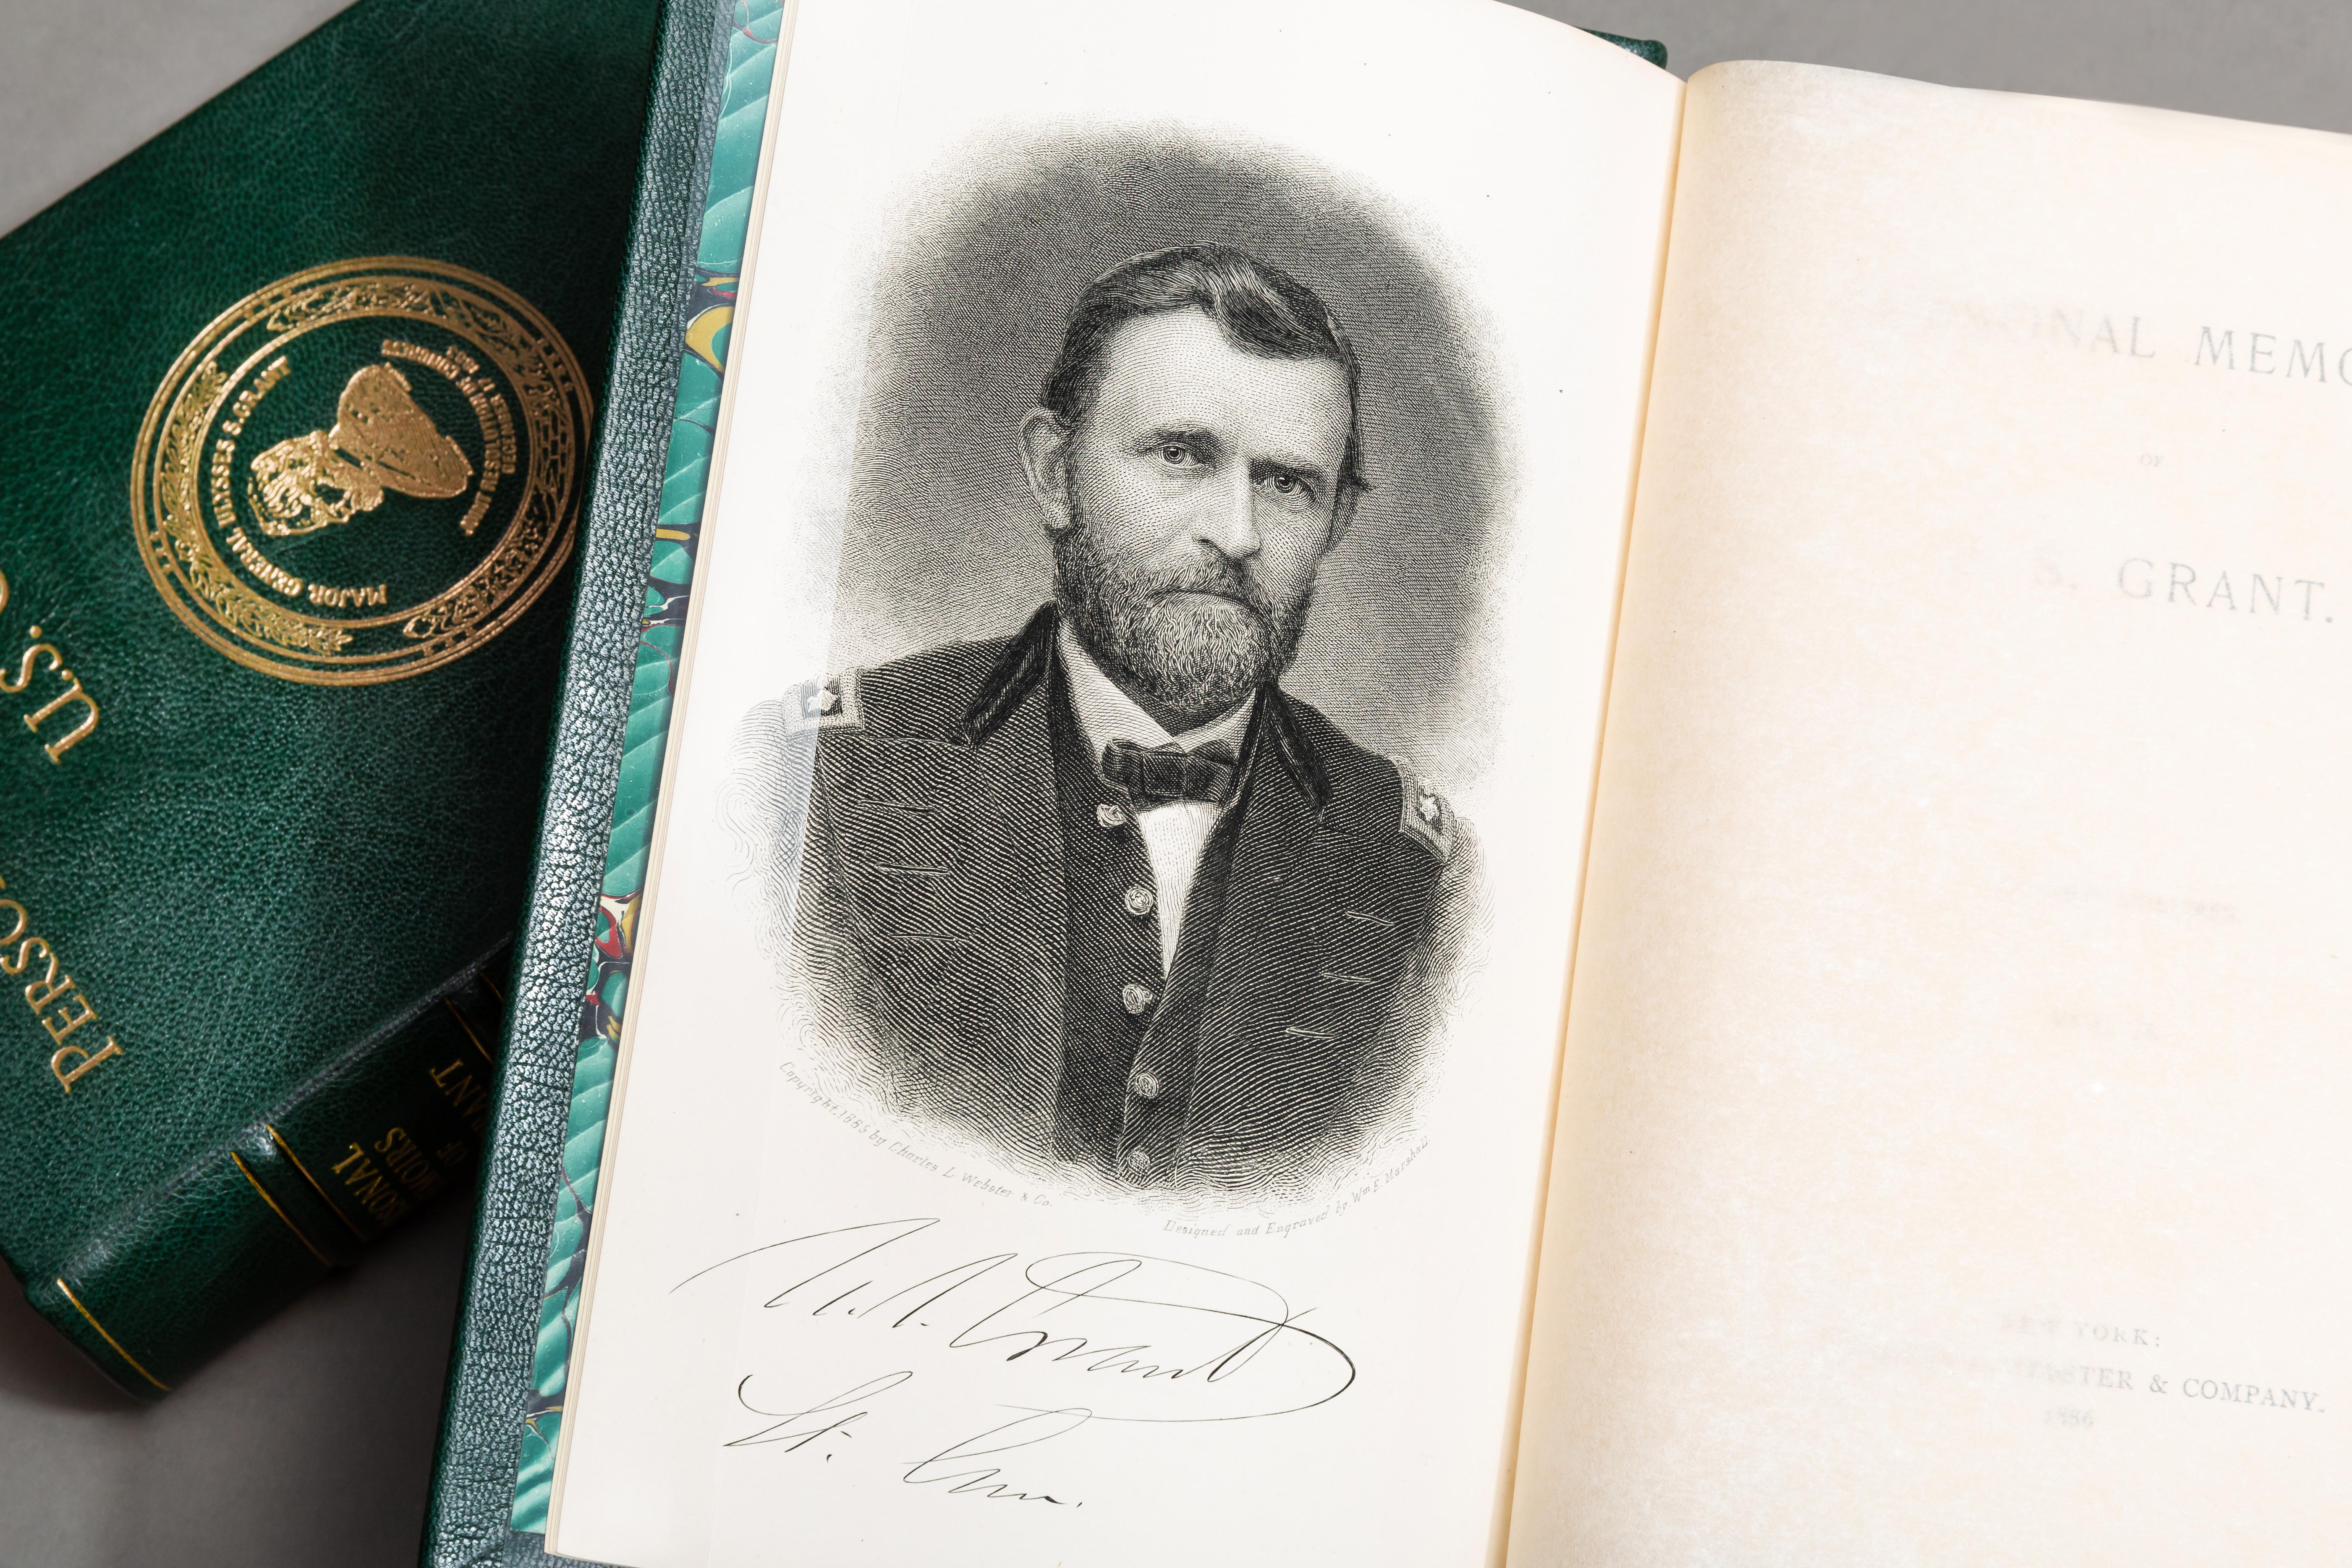 2 Volumes. Ulysses S. Grant. Personal Memoirs. First Edition. Rebound in full green morocco. Gilt engravings on covers & spines. Ornate gilt designs on covers. With frontispiece. Marbled endpapers, all edges gilt, raised bands. Printed by J. J.